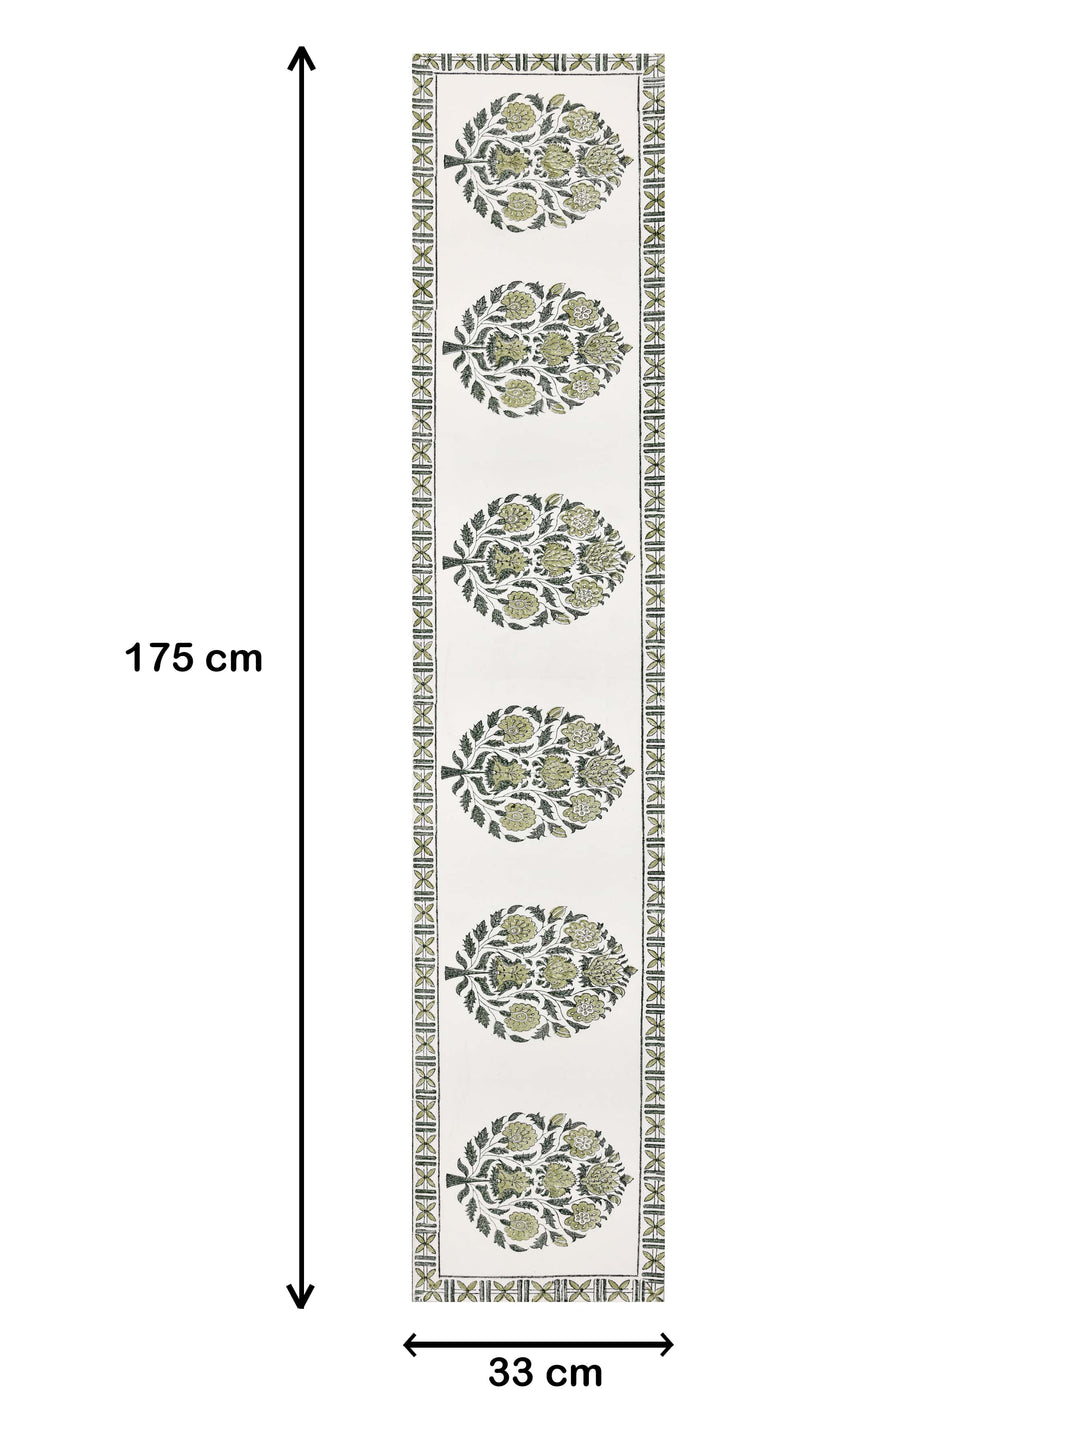 Table Runner; 13x70 Inches; Green Flowers & Green Leaves